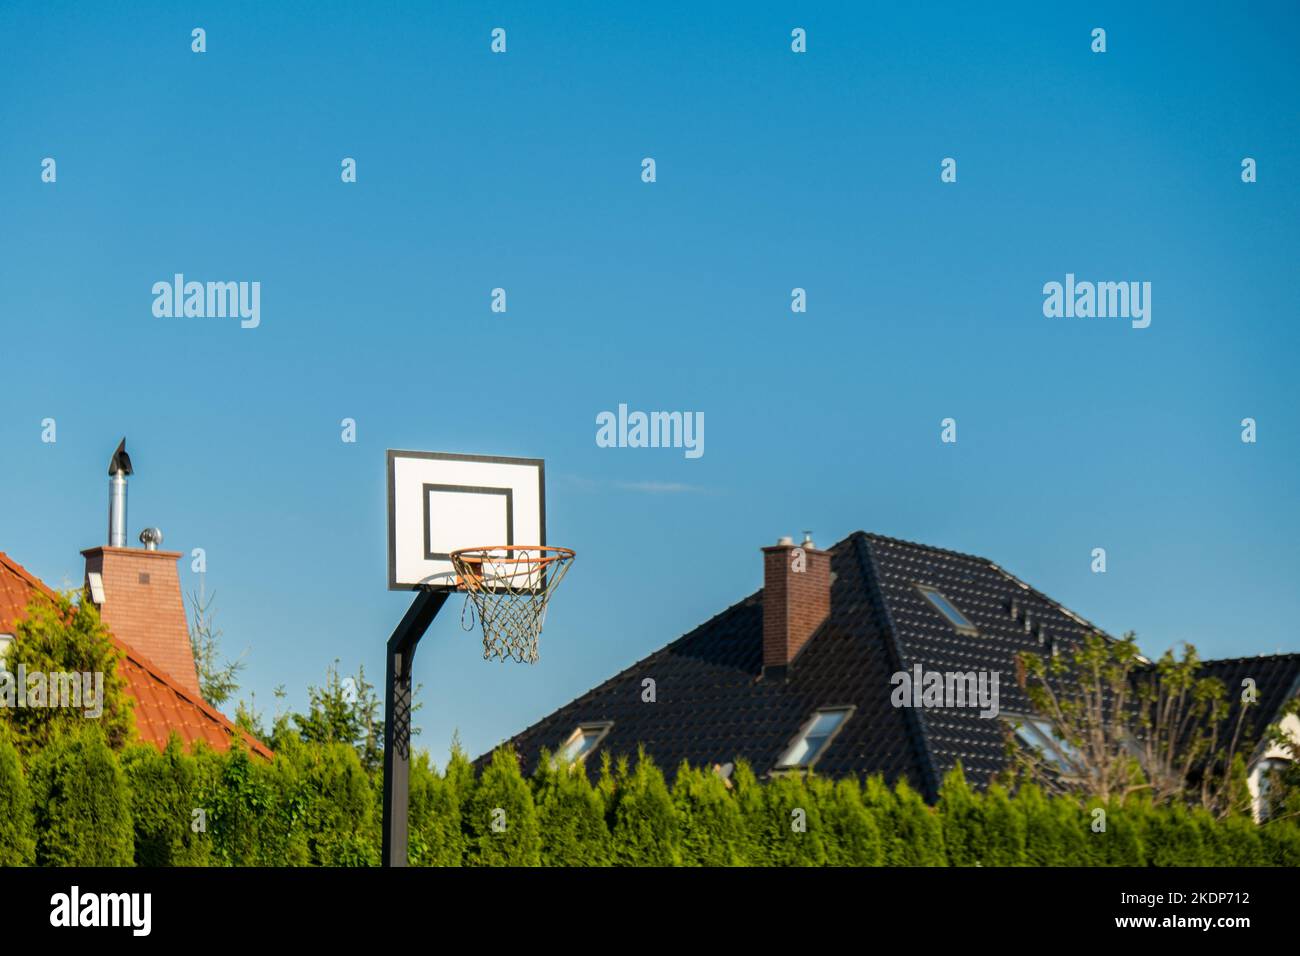 Street basketball hoop on background of vibrant sky. Creative minimalistic photo. Street Basketball Loop Basket Outdoors Abstract sport wide blank empty background texture, copy space. Sports, leisure activities creative bright backgrounds concept Stock Photo